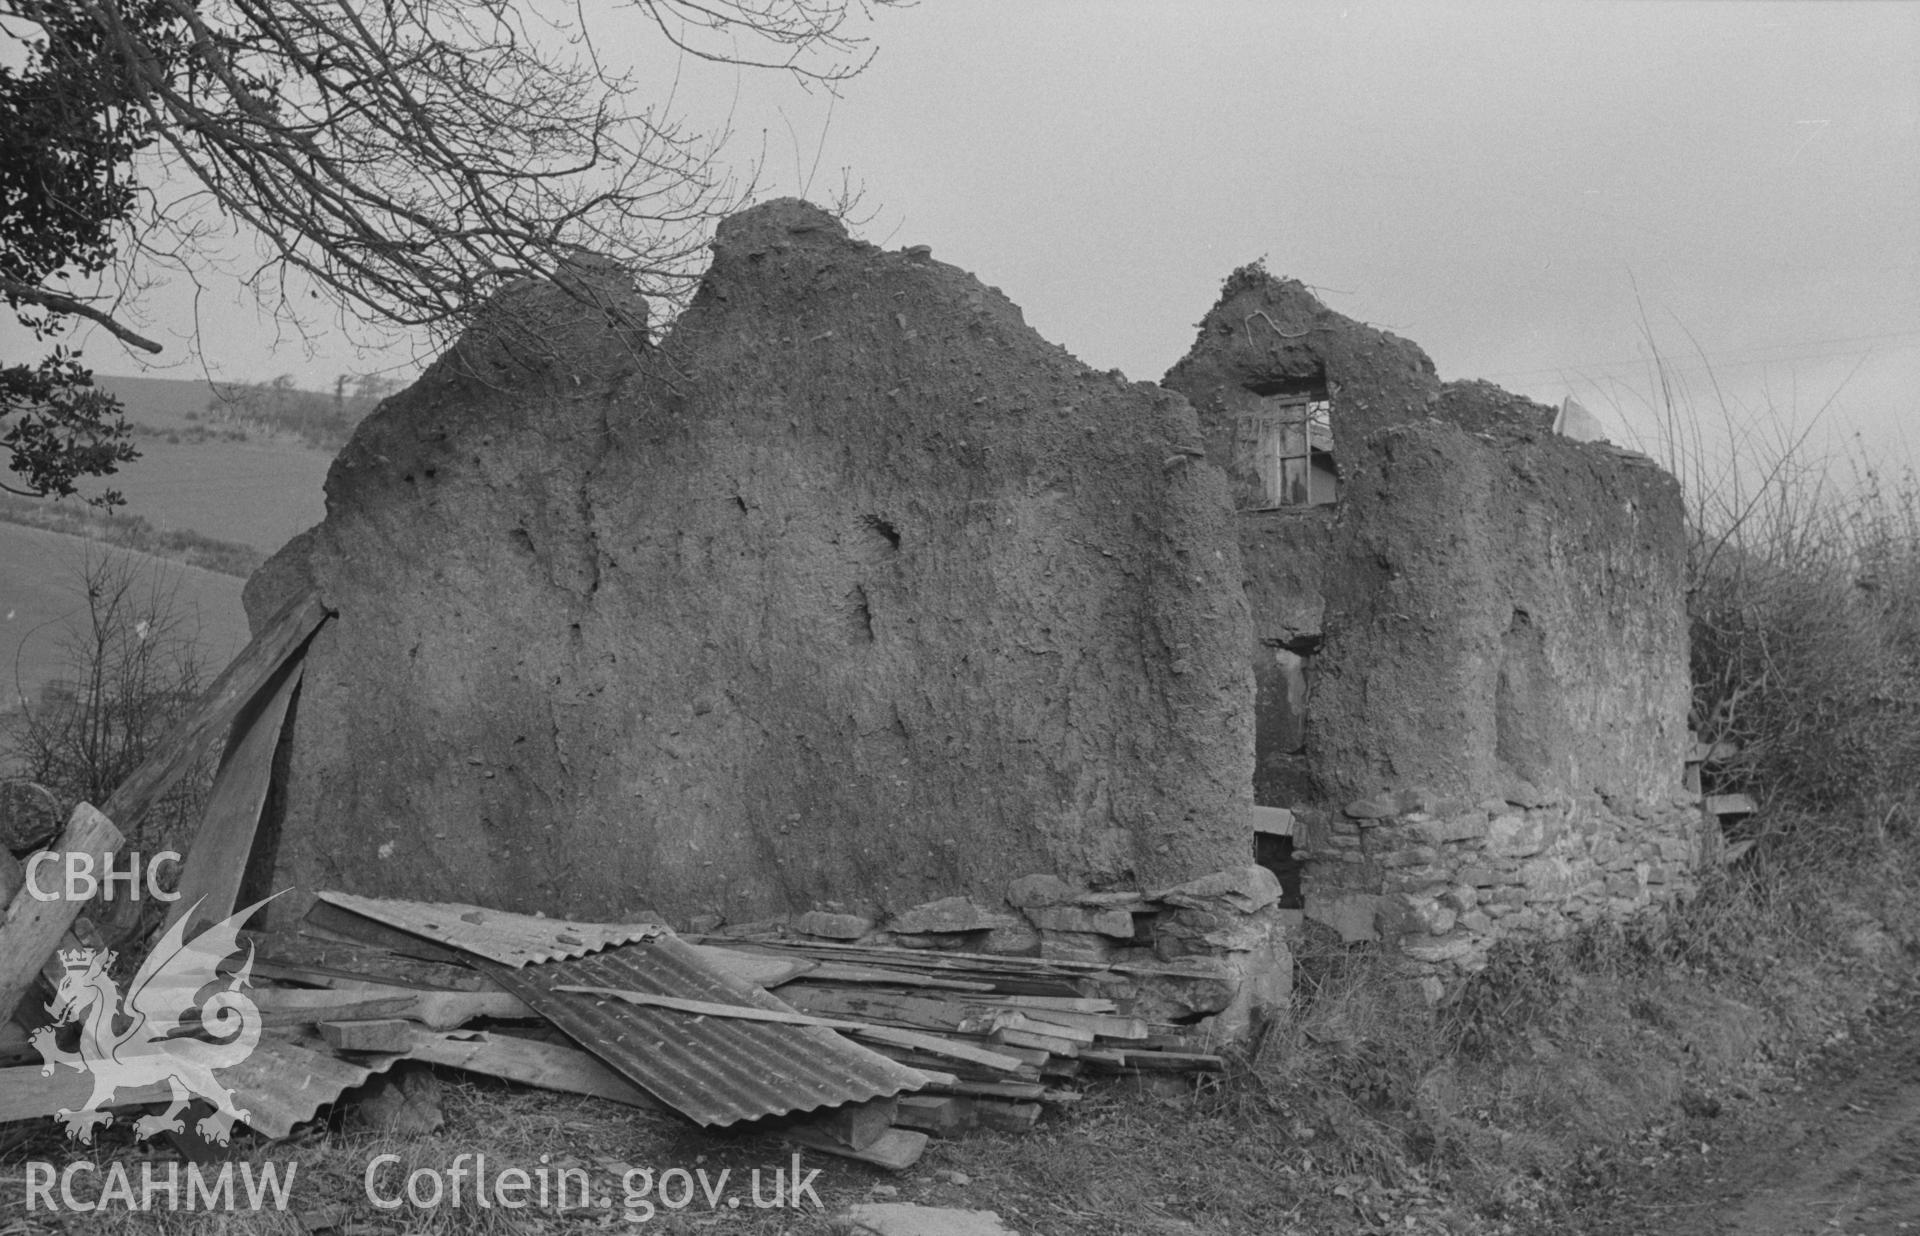 Digital copy of a black and white negative showing ruined mud cottage on the north side of Afon Llanfihangel 200m west of the Church. Photographed by Arthur O. Chater on 24th January 1968, looking north east from Grid Reference SN 664 760.